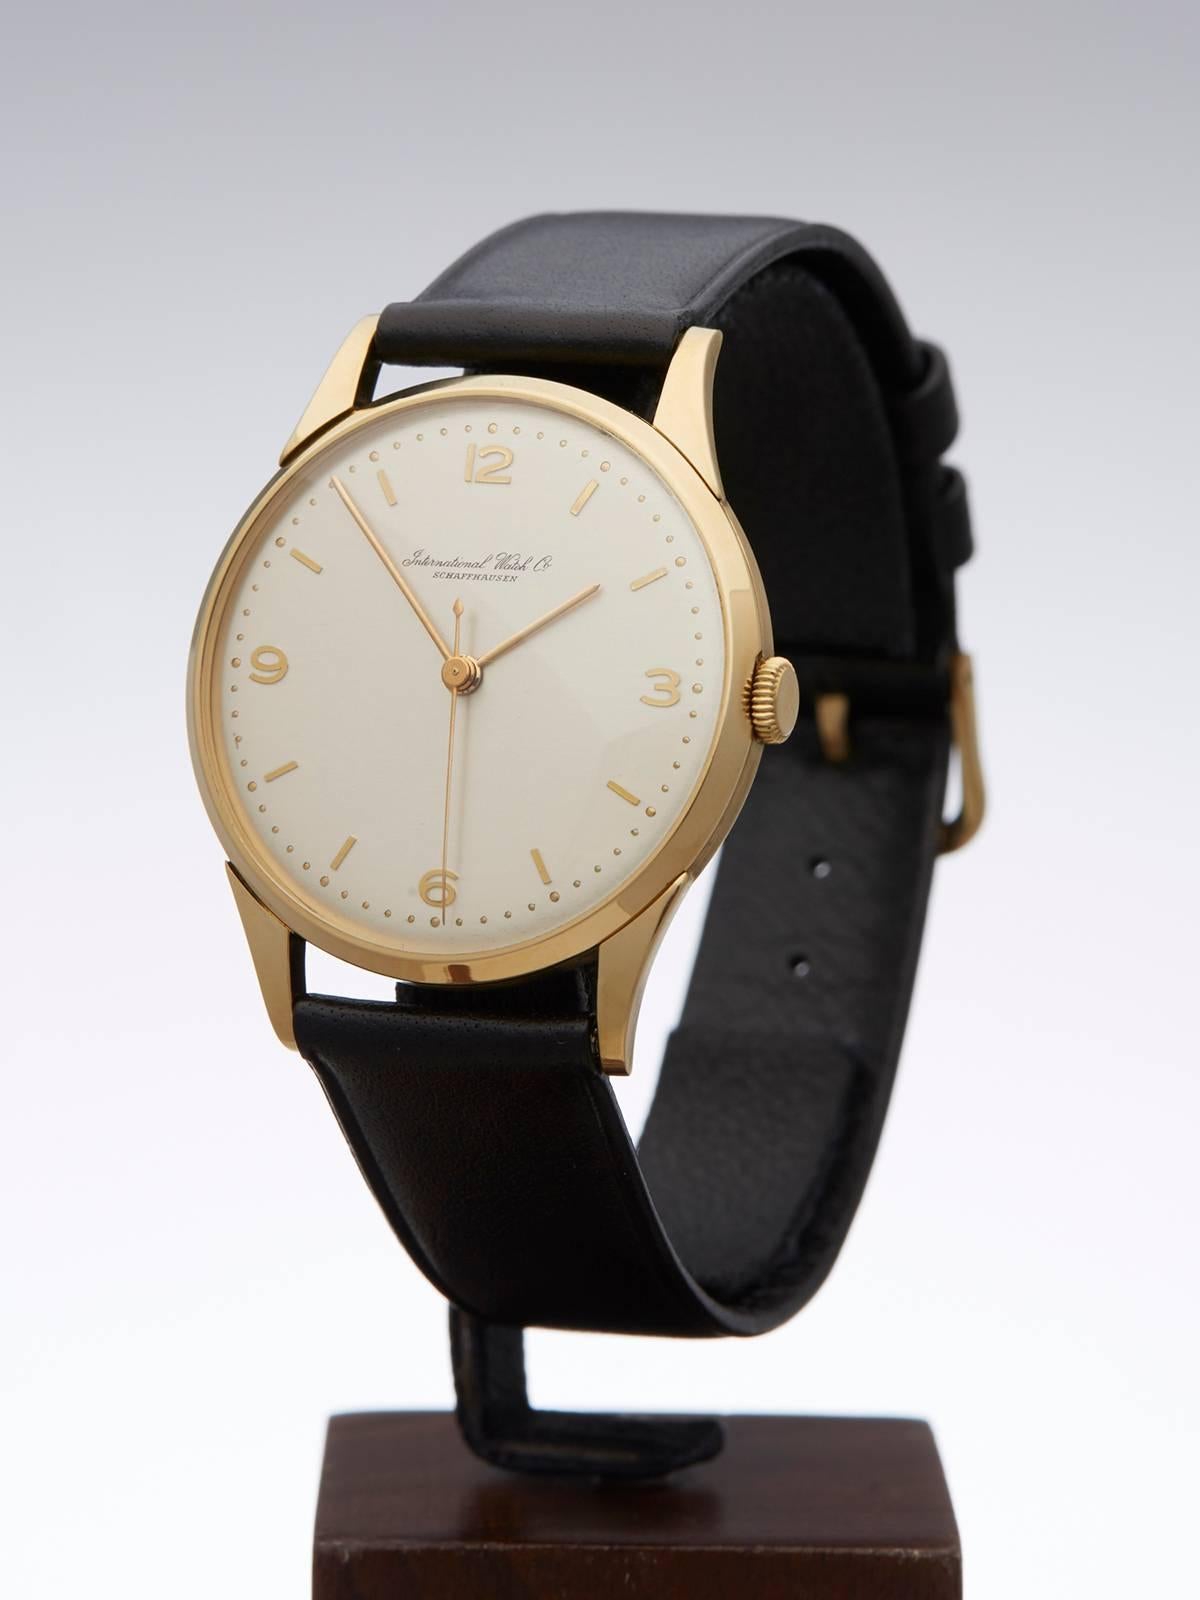 Ref: COM785
Condition: 9 - Excellent condition
Age: 1949
Case Diameter: 35 mm
Case Size: 35mm
Box and Papers: Box Only
Movement: Mechanical Wind
Case: 18k Yellow Gold
Dial: Silver
Bracelet: Black Leather
Strap Length: Adjustable up to 18cm
Strap